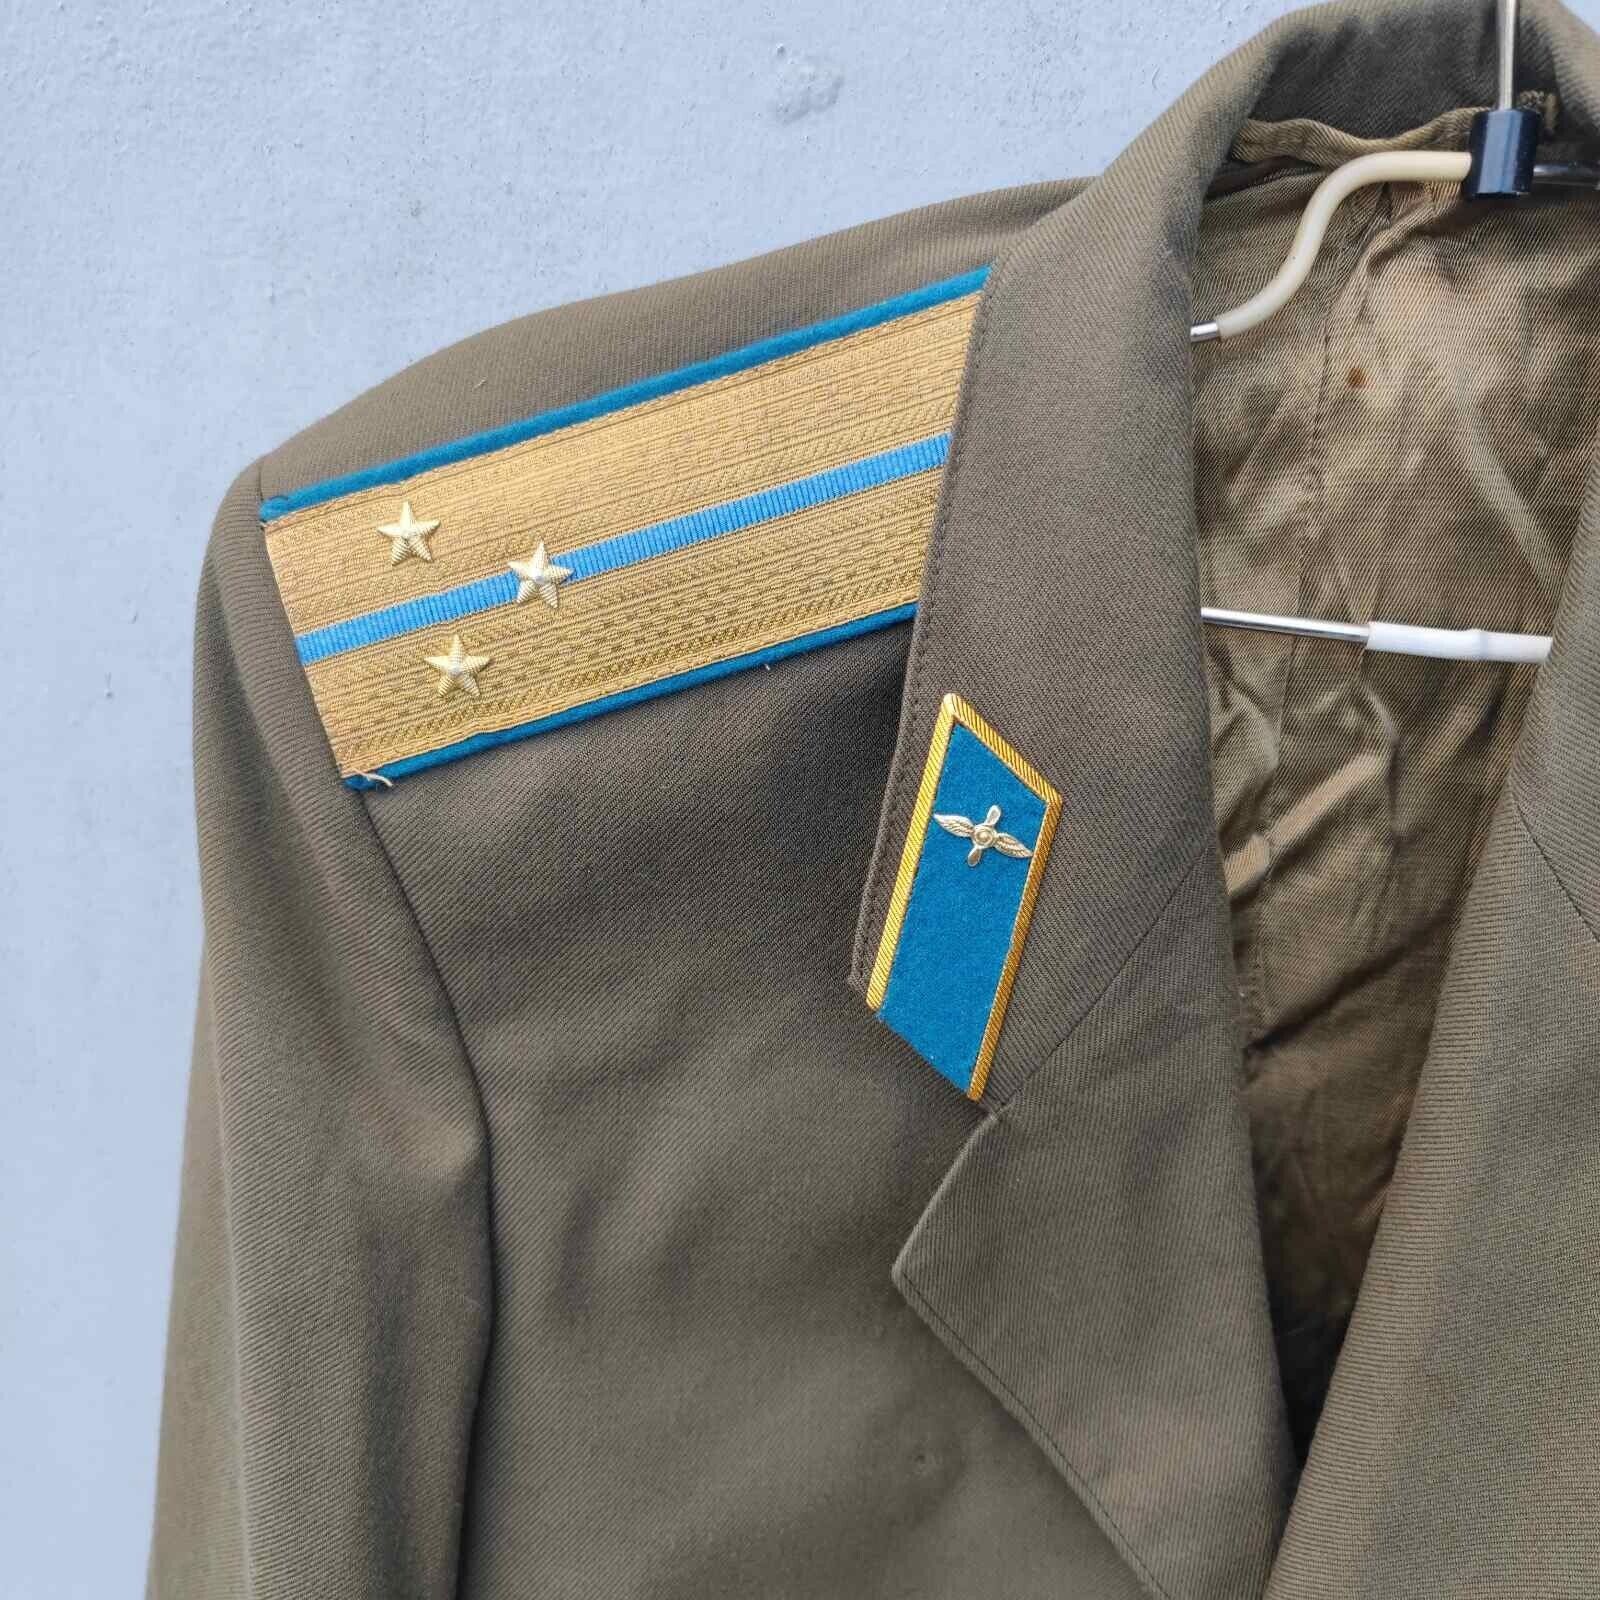 Soviet Jacket Air Force Pilot Troops Military St. Liutenant  Officer USSR Army